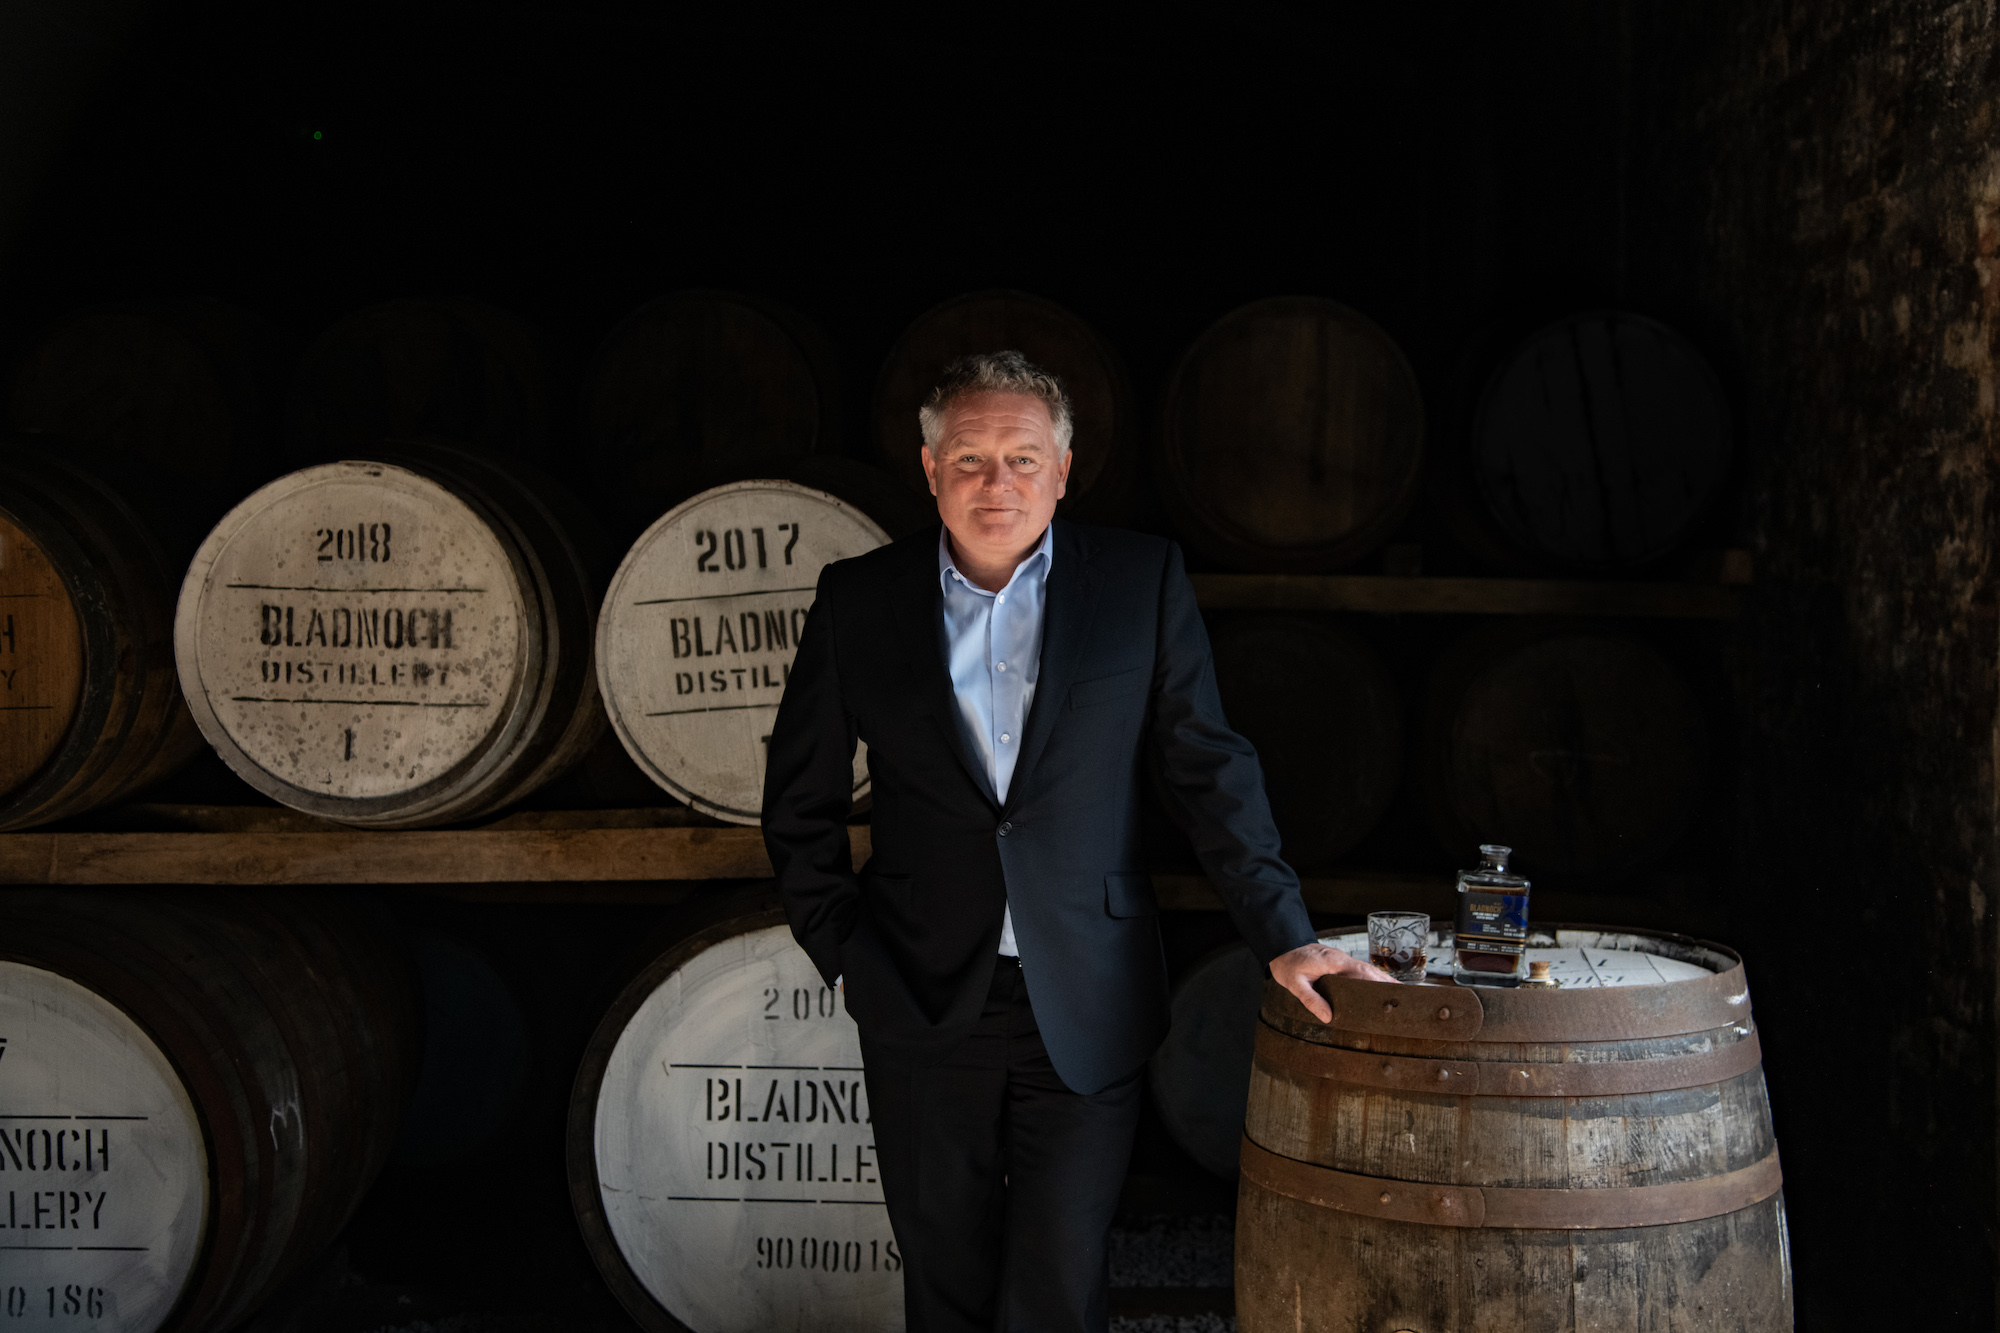 New leadership team to drive Bladnoch Distillery’s global ascent